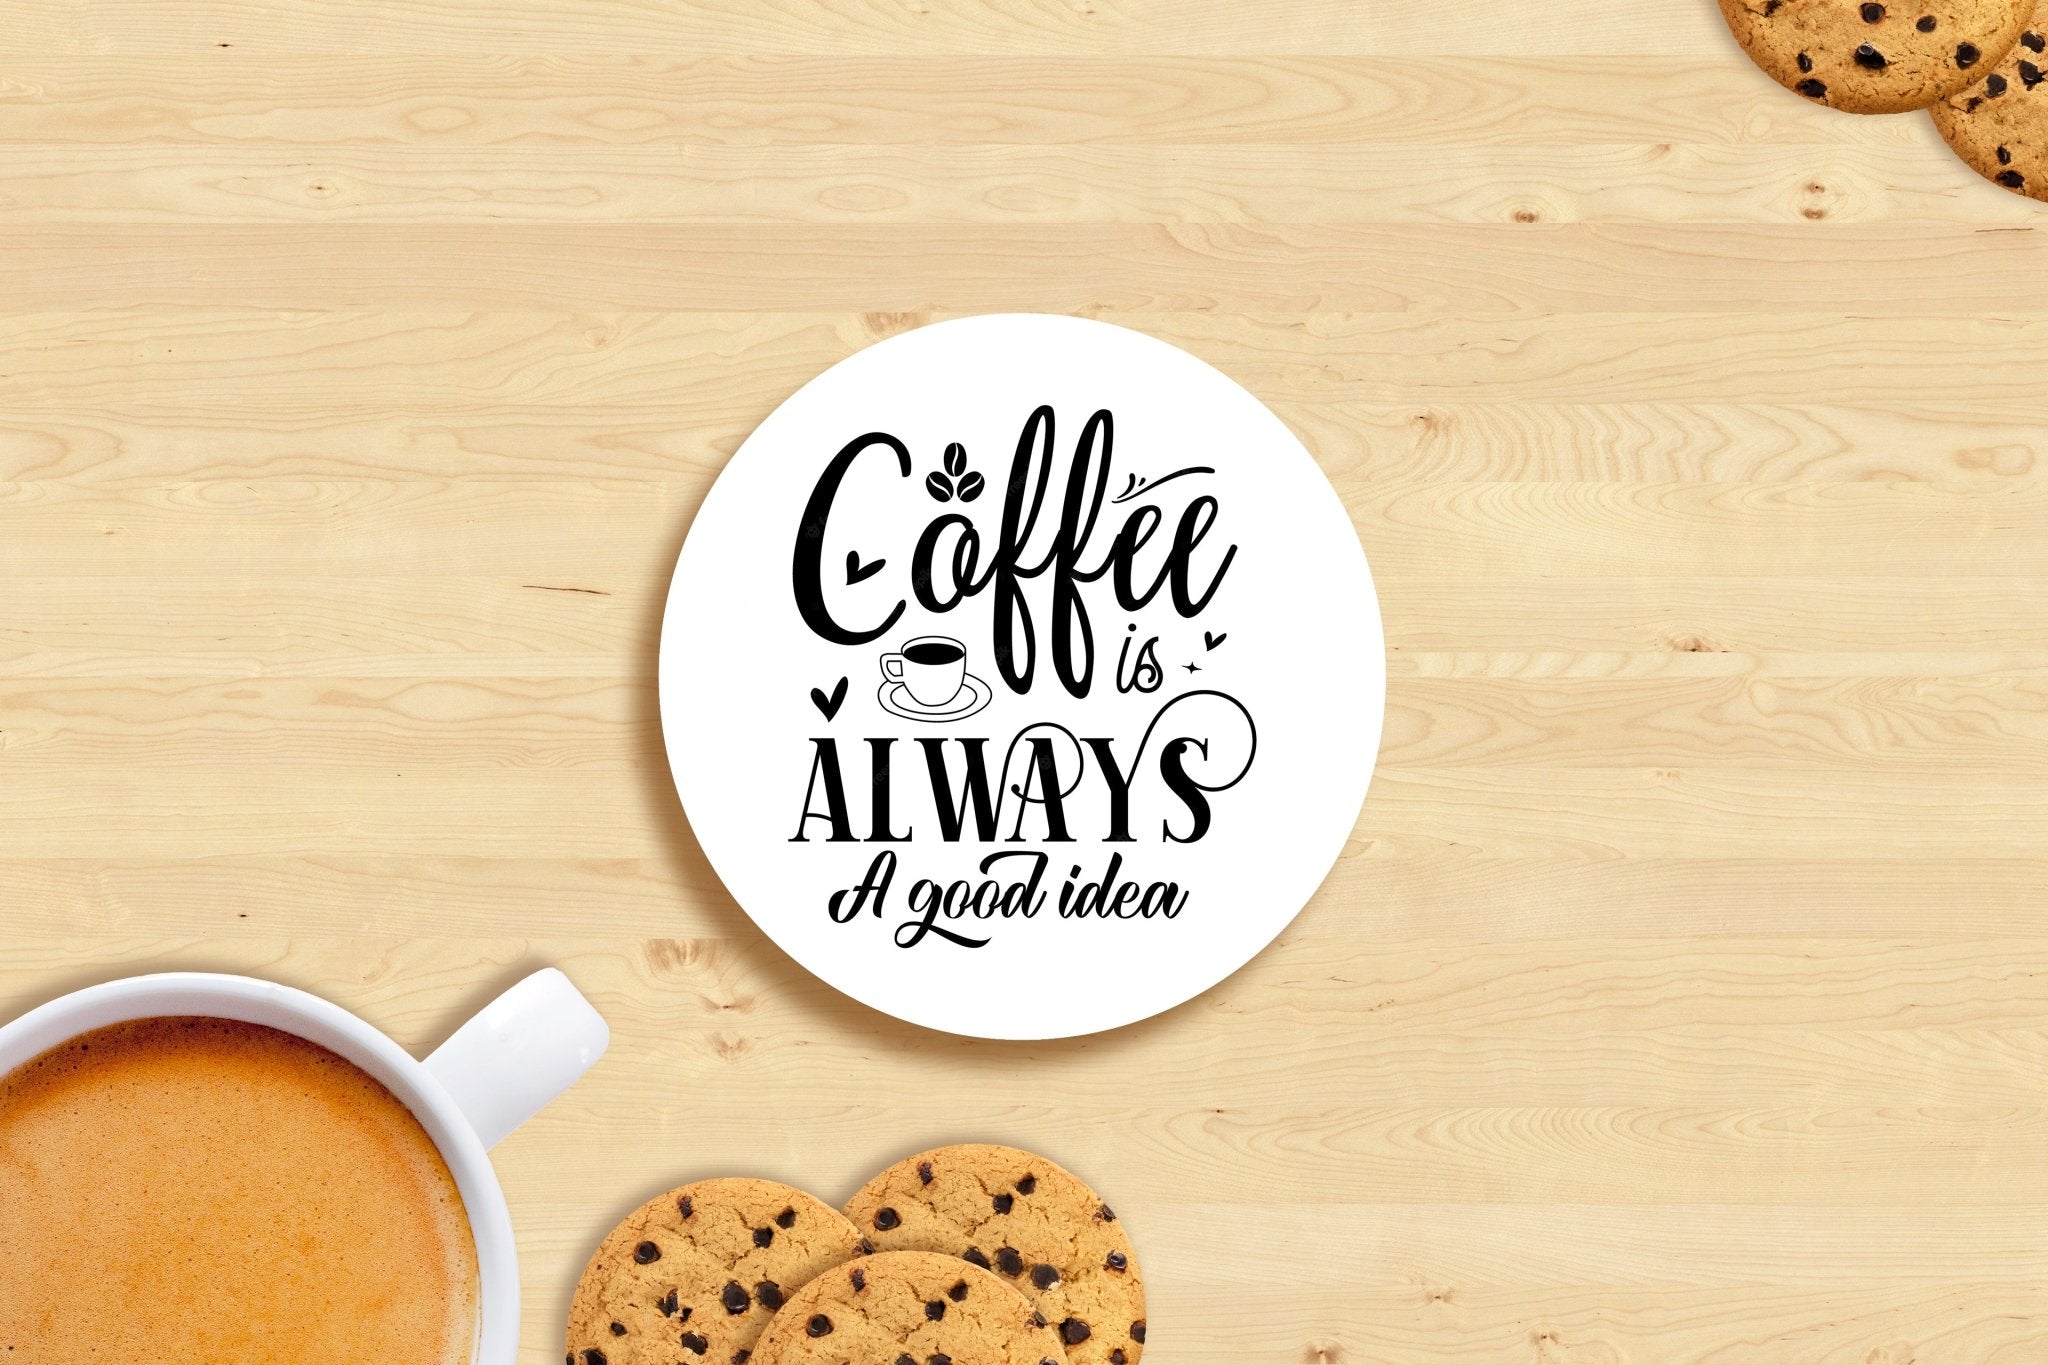 Good Morning Coasters: 6-Pack for Your Coffee Ritual